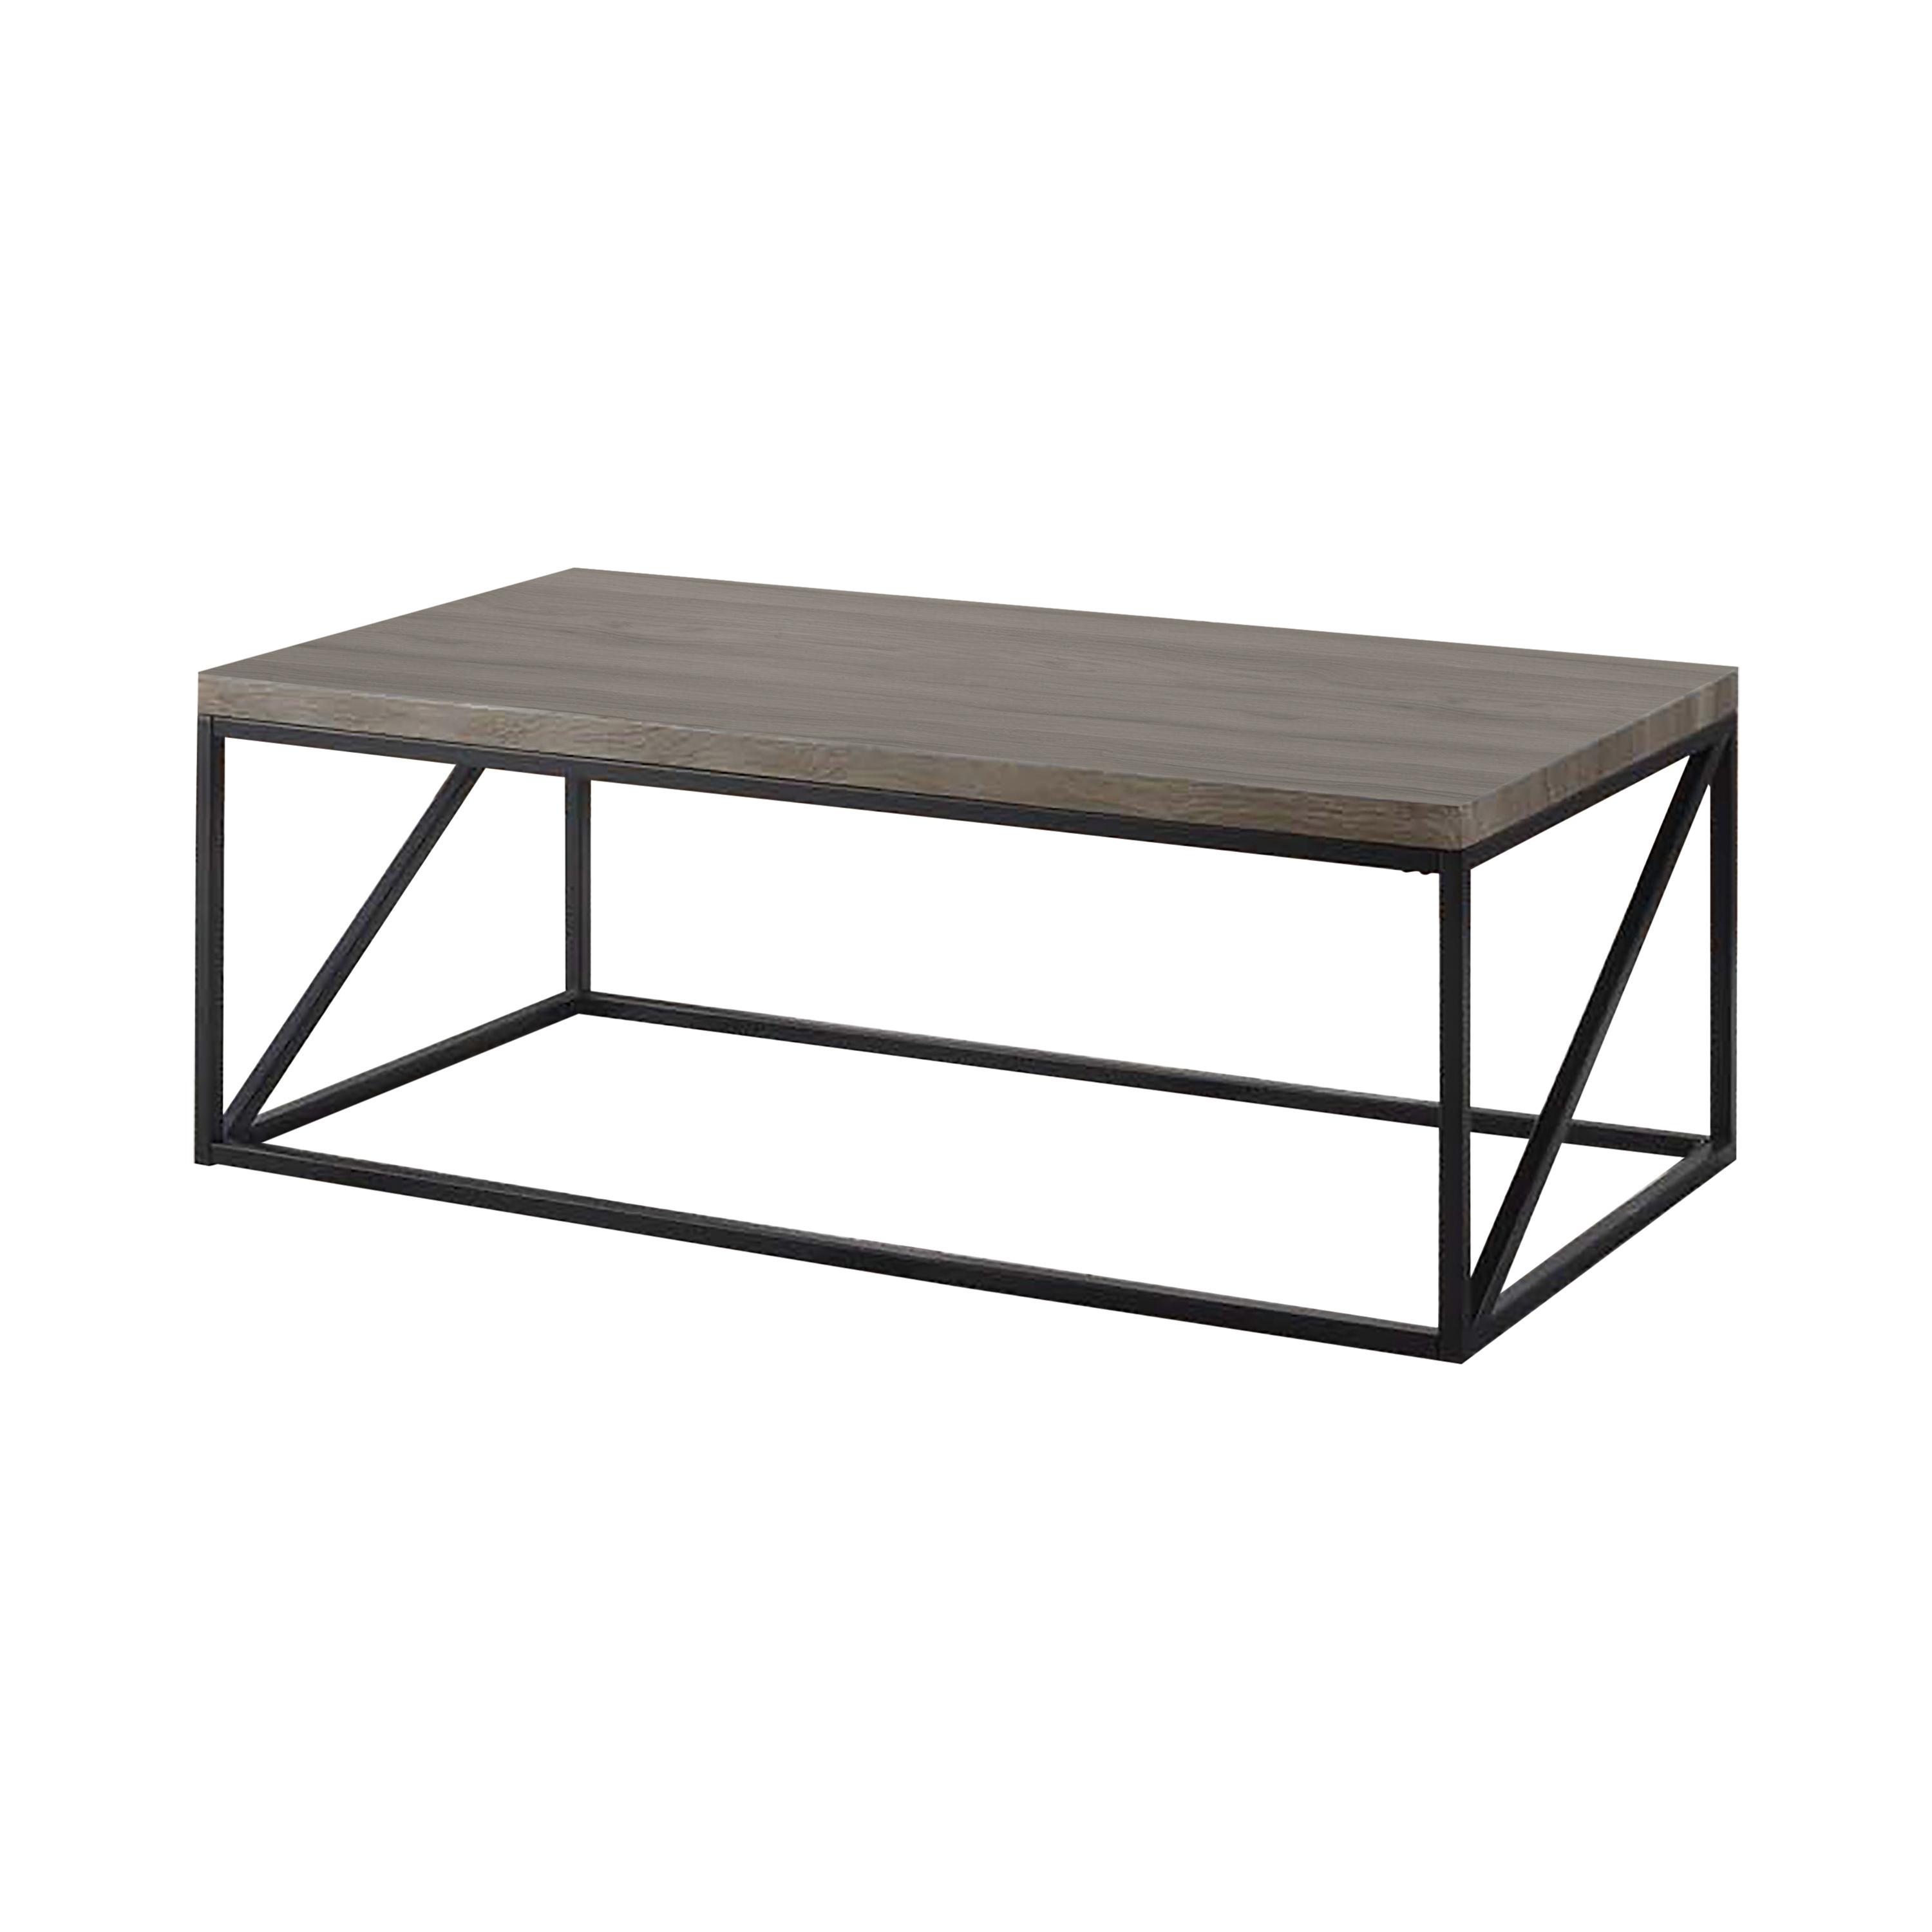 Contemporary Coffee Table 705618 705618 in Gray 